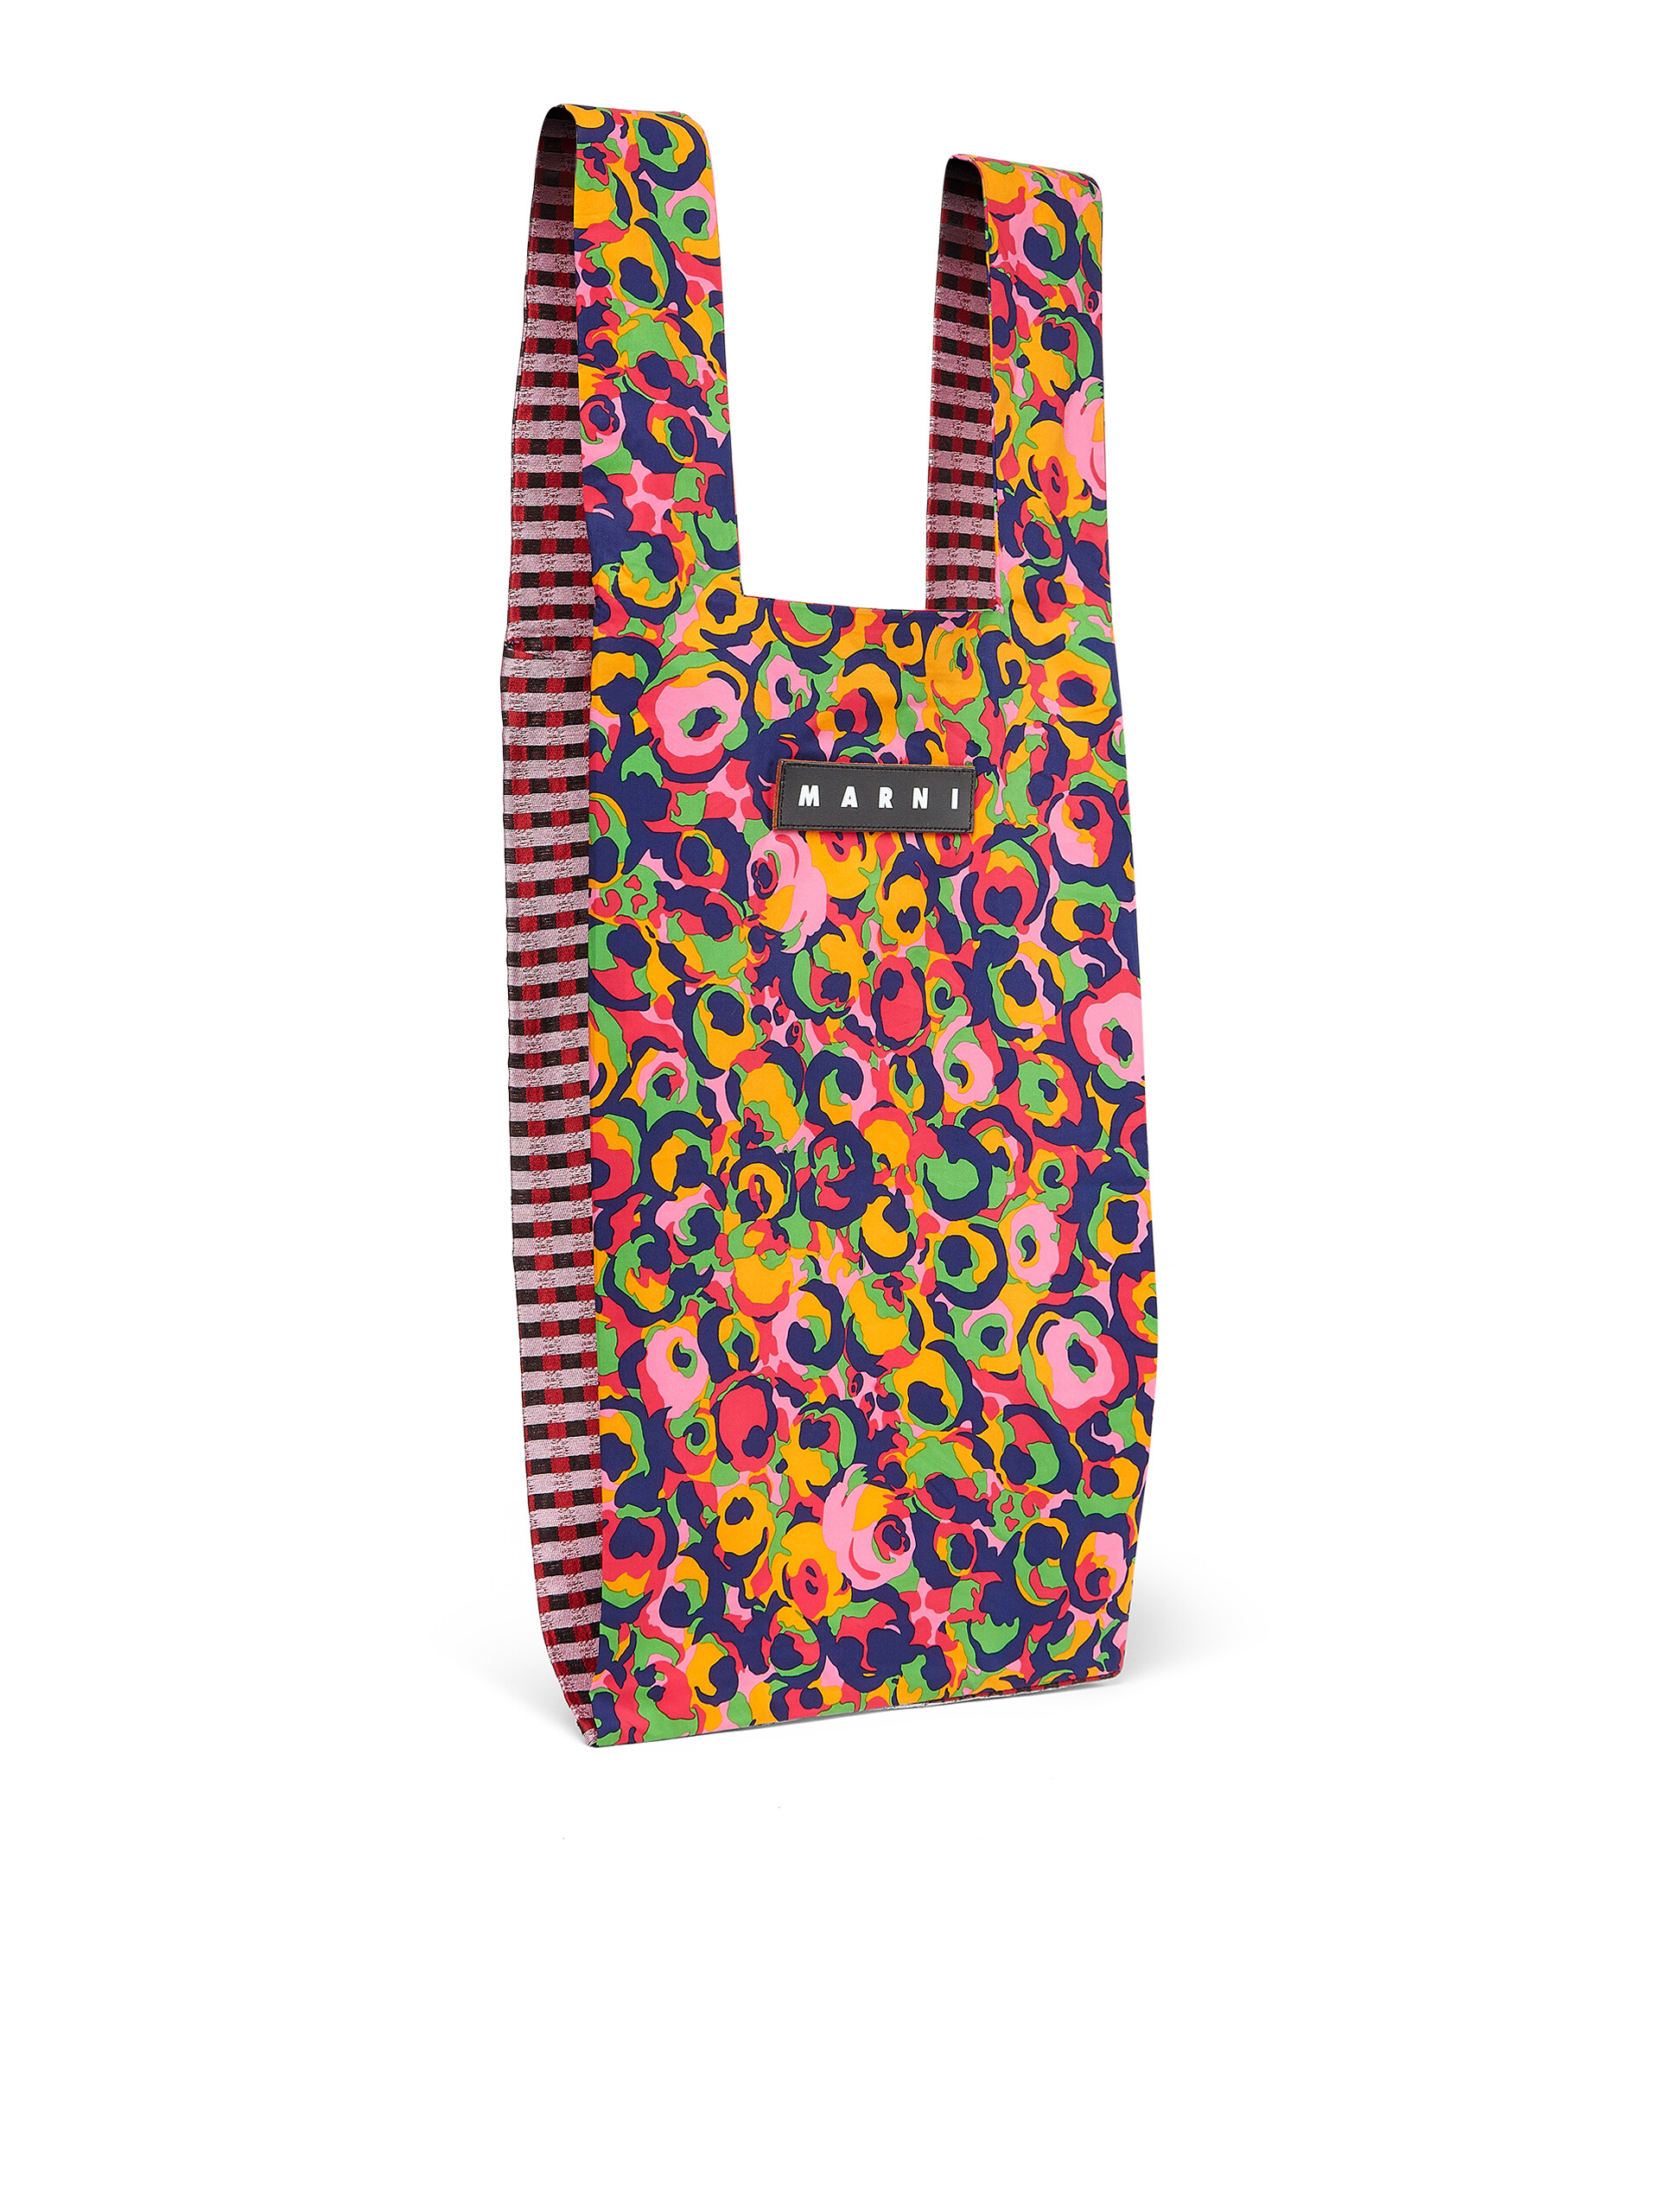 MARNI MARKET TOTE cotton shopping bag with floral and check print - Shopping Bags - Image 2